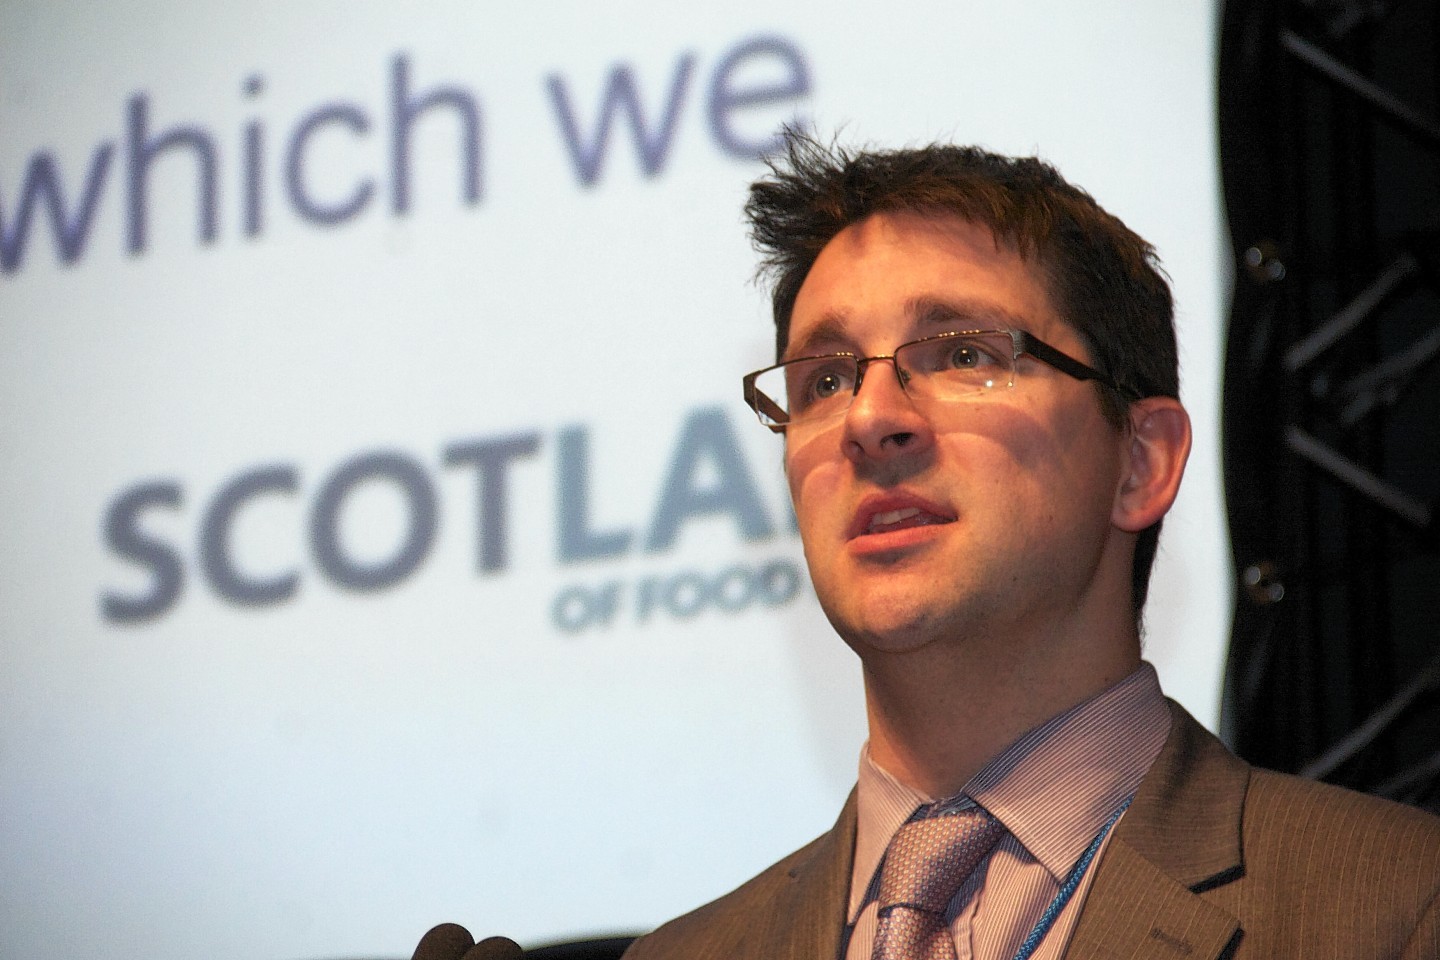 Scotland Food and Drink chief executive James Withers